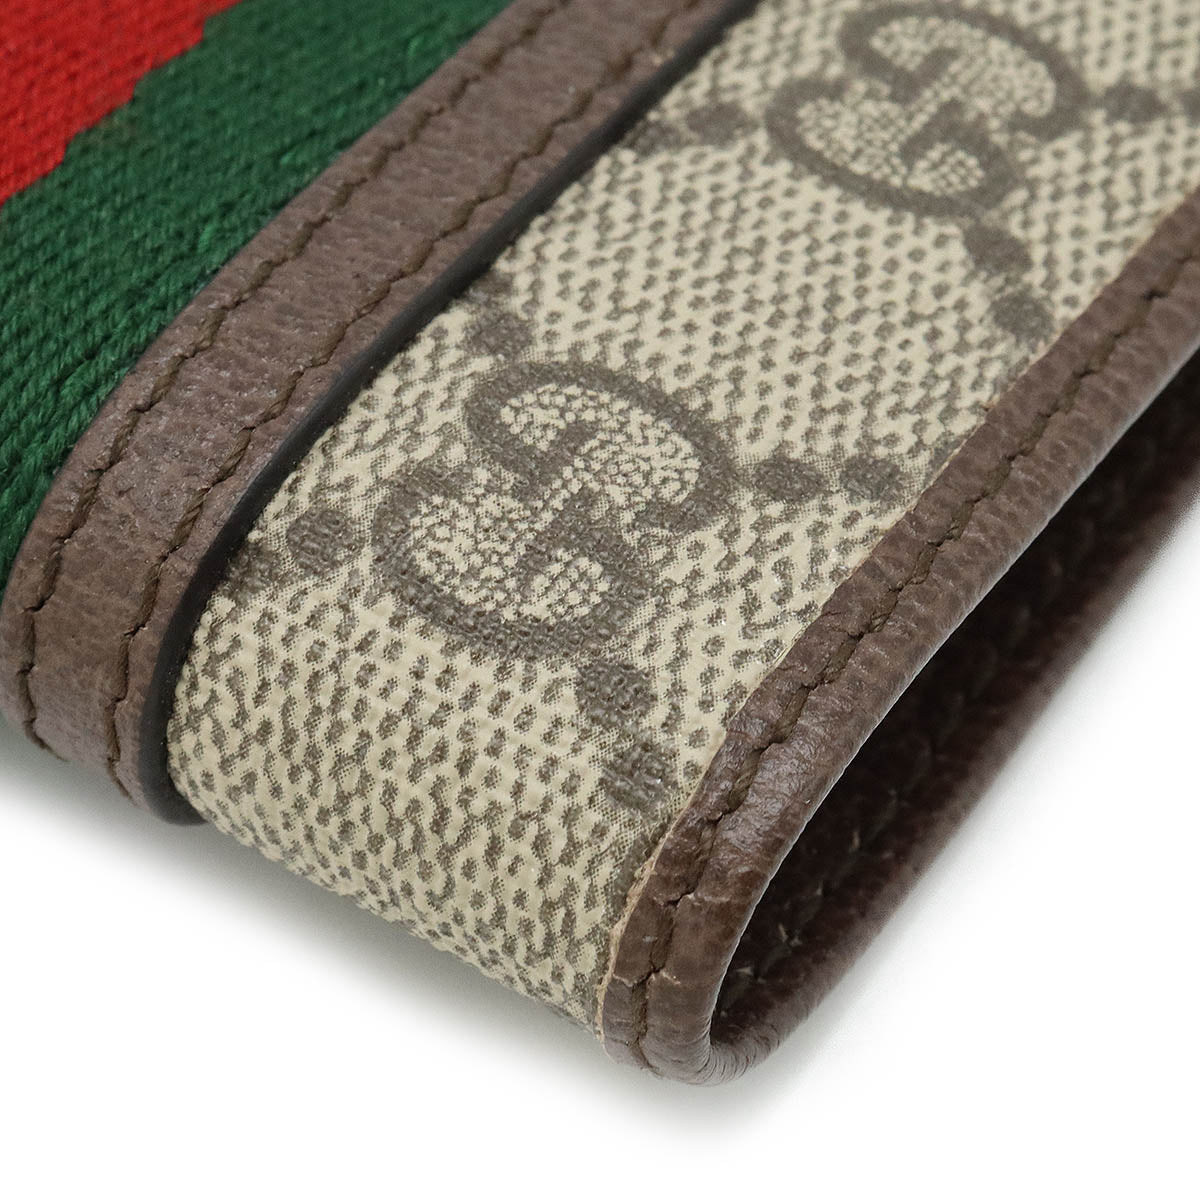 GUCCI Gucci GG Spring Office Shell Line Wallet 2 Folded Wallet PVC Carquibbean Mocha Brown Green Red 597609